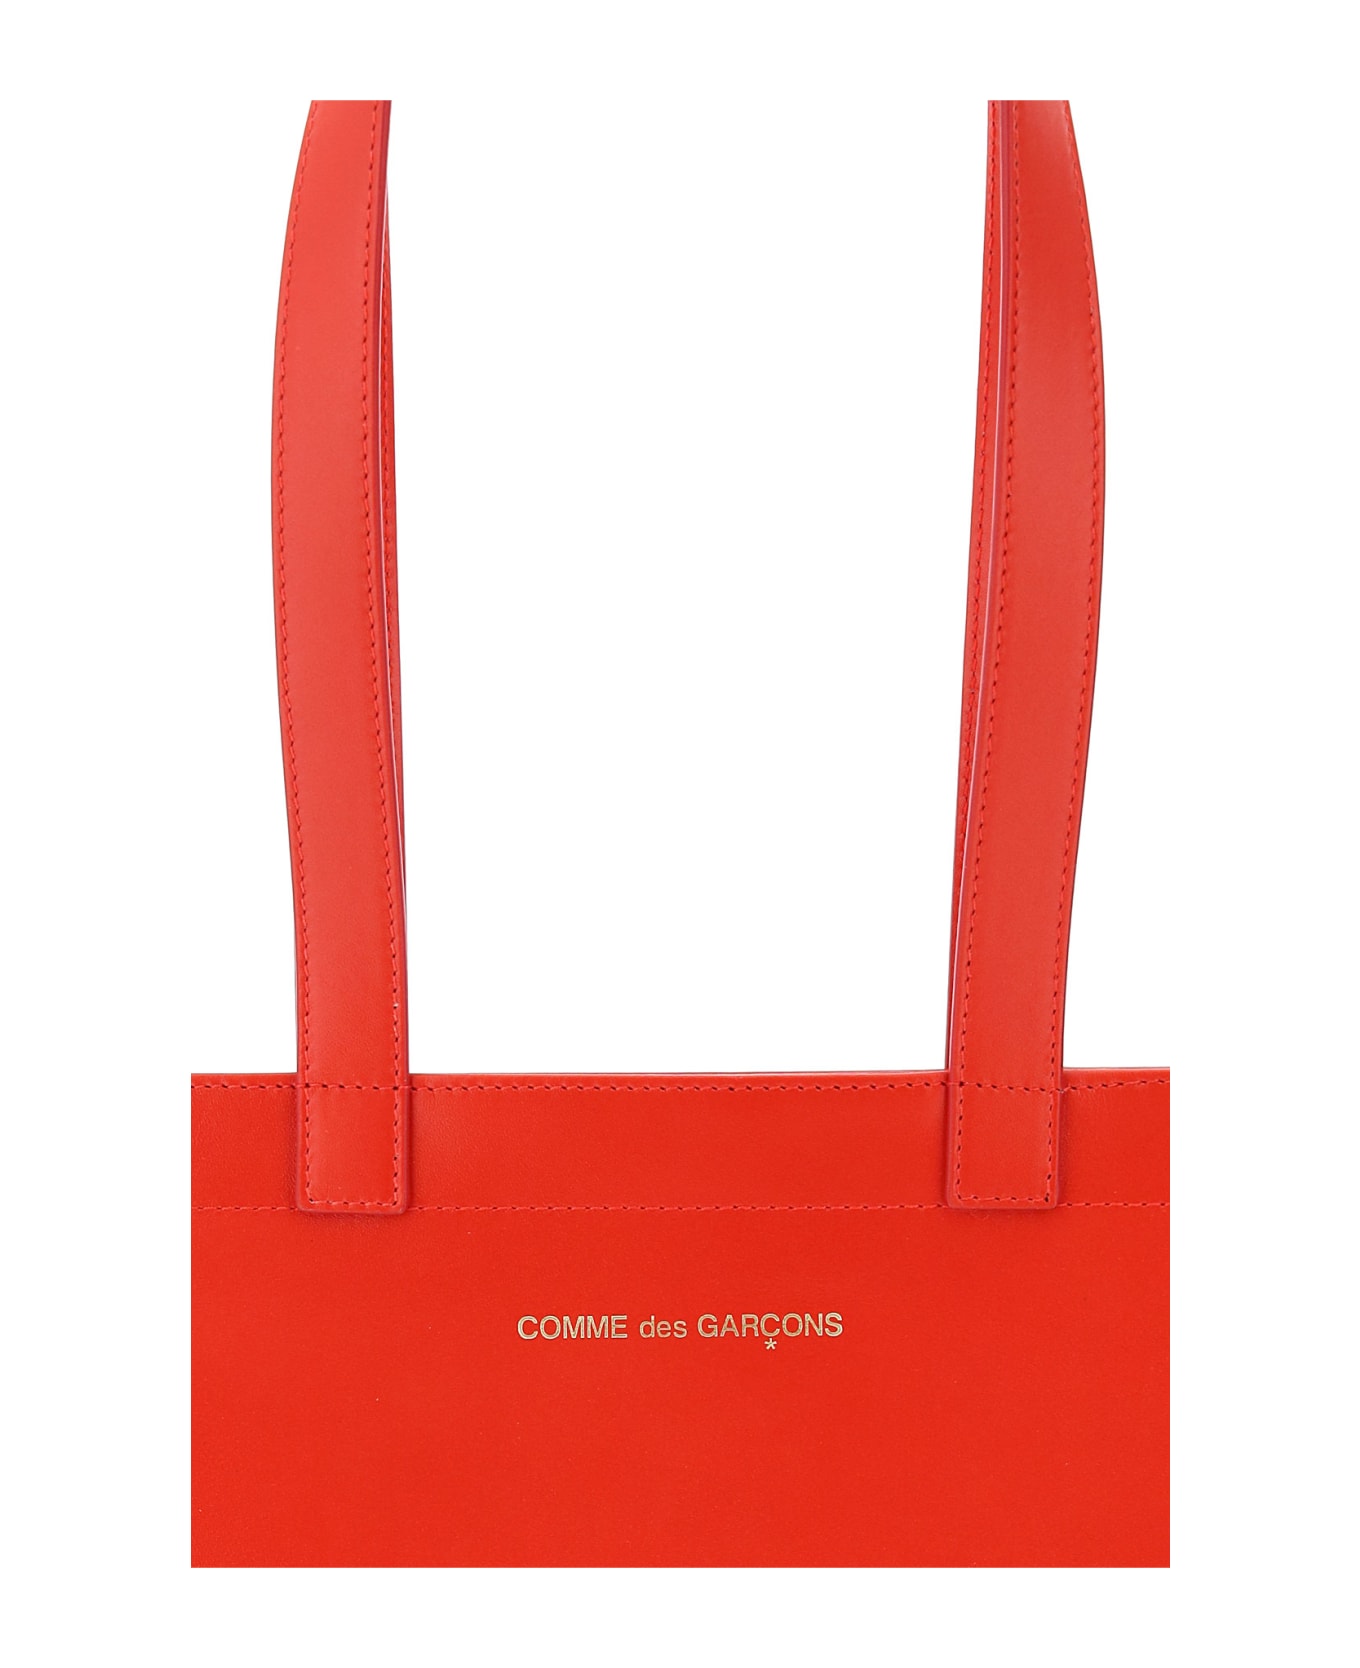 Comme des Garçons Shirt Boy Leather Tote Bag With Logo - Red トートバッグ